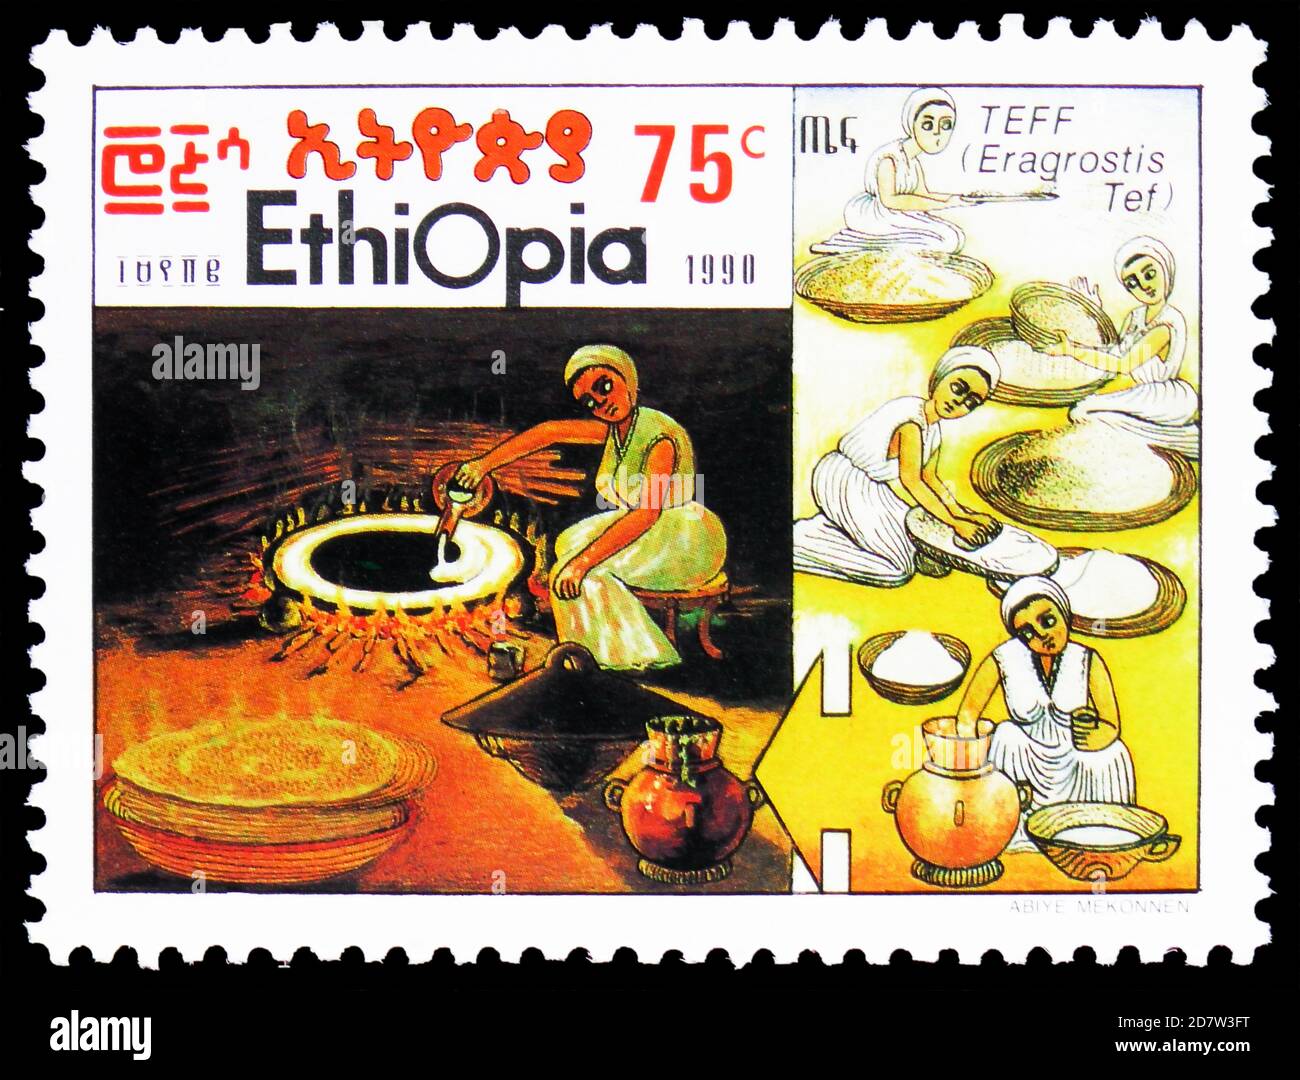 MOSCOW, RUSSIA - OCTOBER 9, 2020: Postage stamp printed in Ethiopia shows Cooking food, Cultivation of cereal Tef (Eragrostis tef) serie, circa 1990 Stock Photo